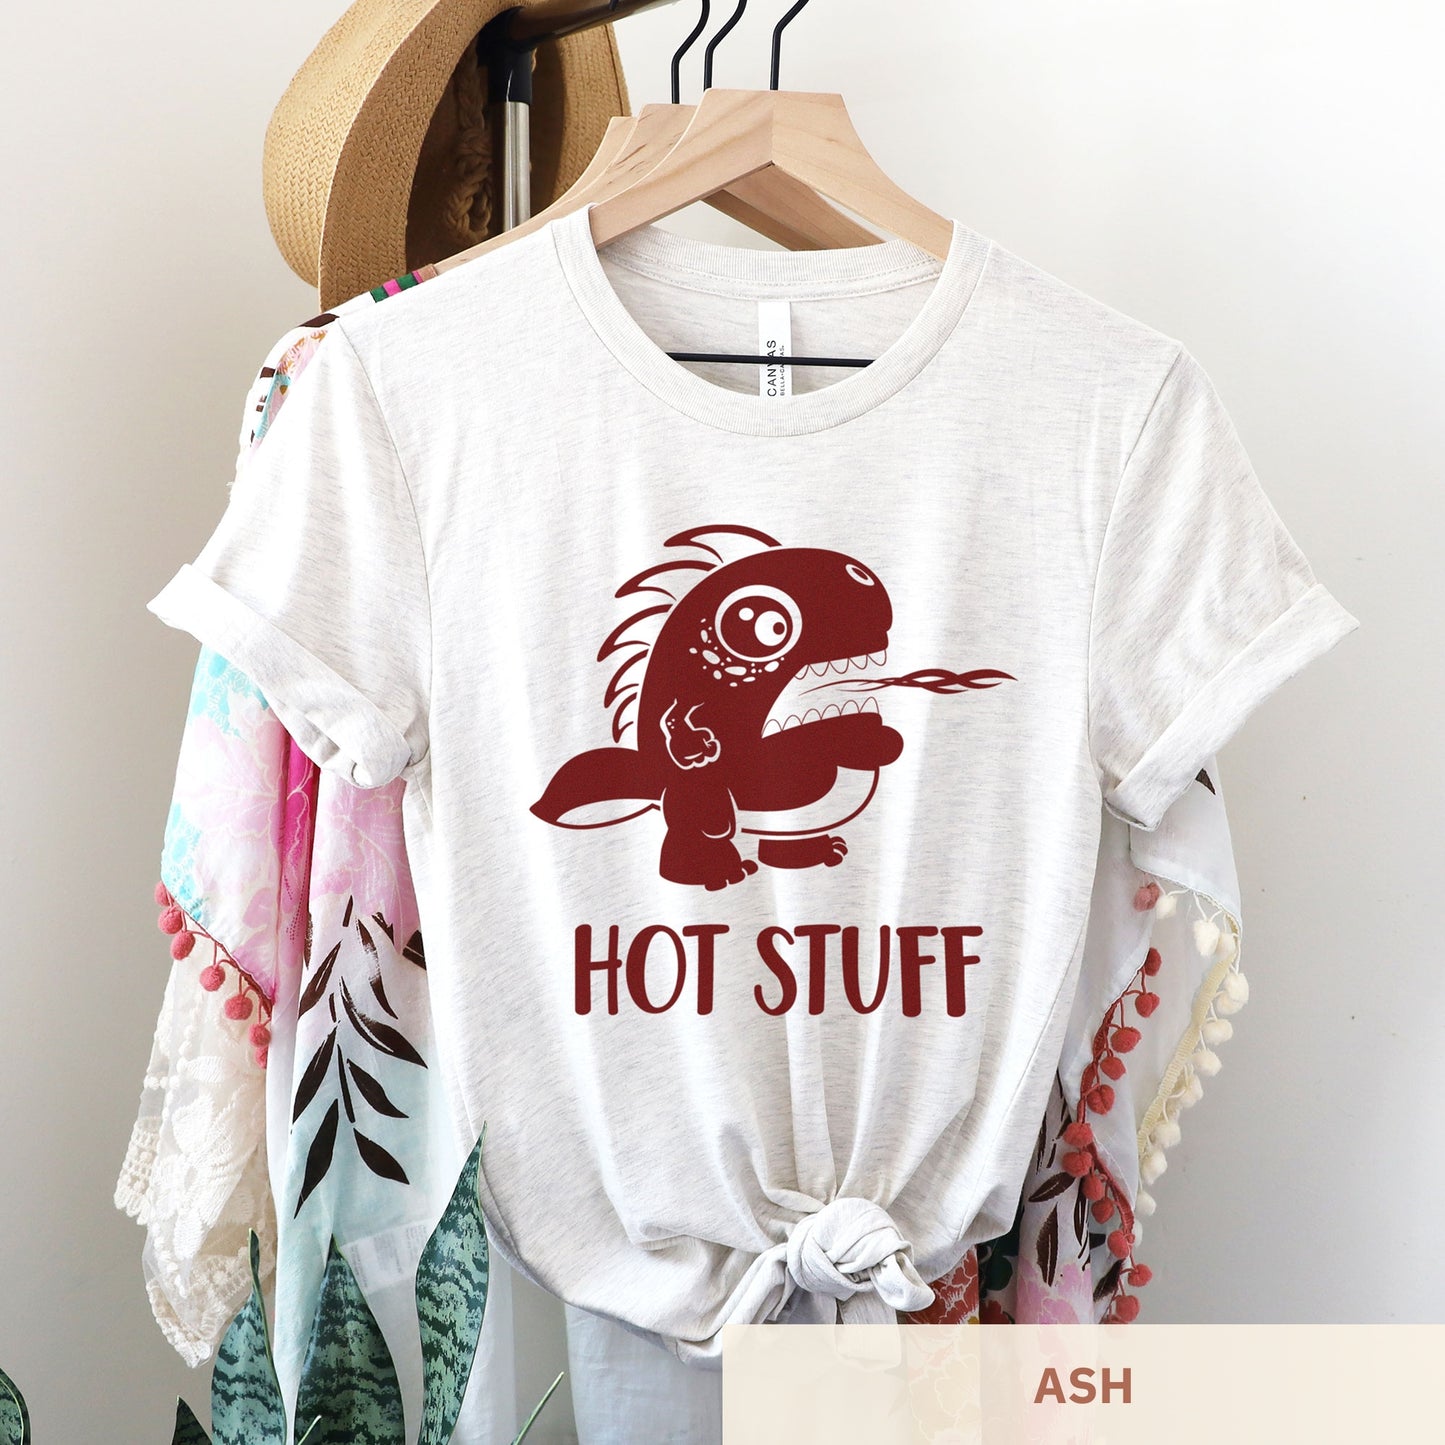 A hanging ash Bella Canvas t-shirt wearing a cute cartoon monster that is belching fire with the words hot stuff.